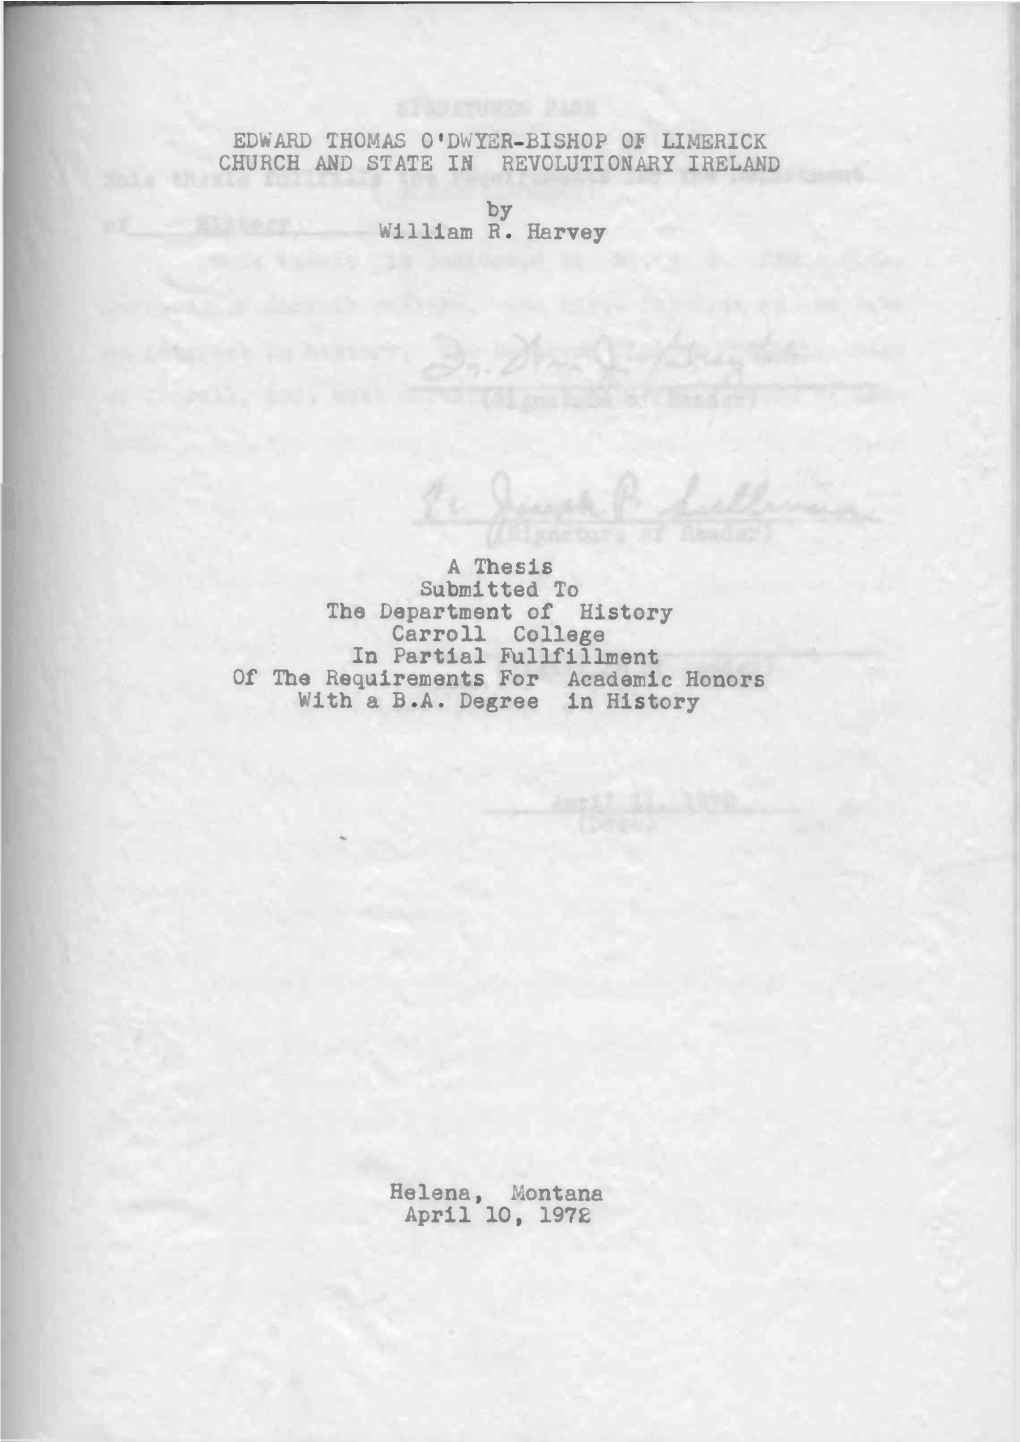 SDWARD THOMAS 0'DWYER-BISHOP of LIMERICK CHURCH and STATE in REVOLUTIONARY IRELAND by William R. Harvey a Thesis Submitted to Th